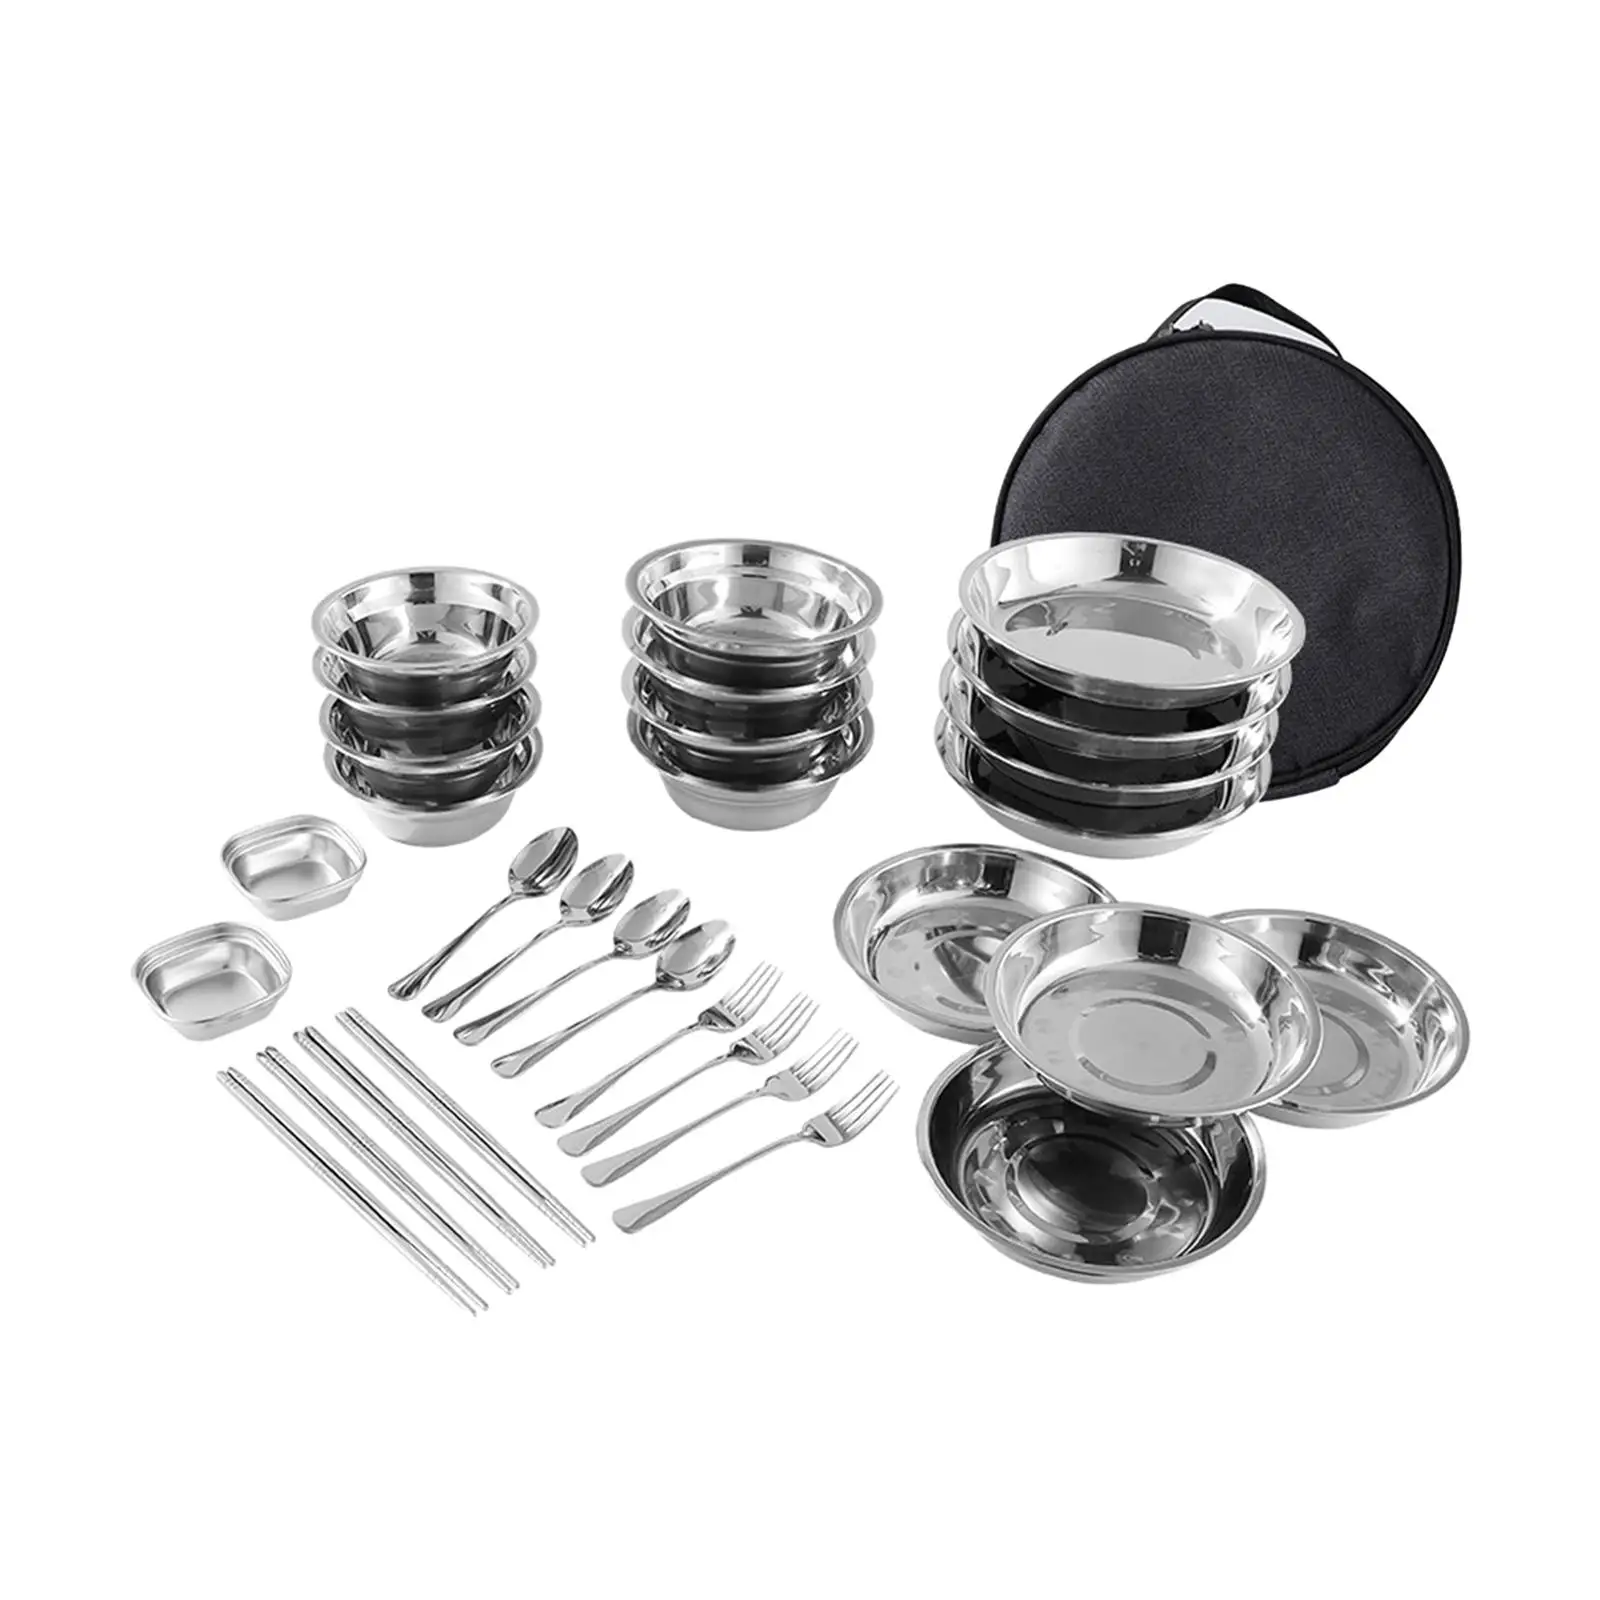 Stainless Steel Plates and Bowls Camping Cutlery Set Dishes Tableware with Carrying Bag Camping Utensils for Barbecue Travel